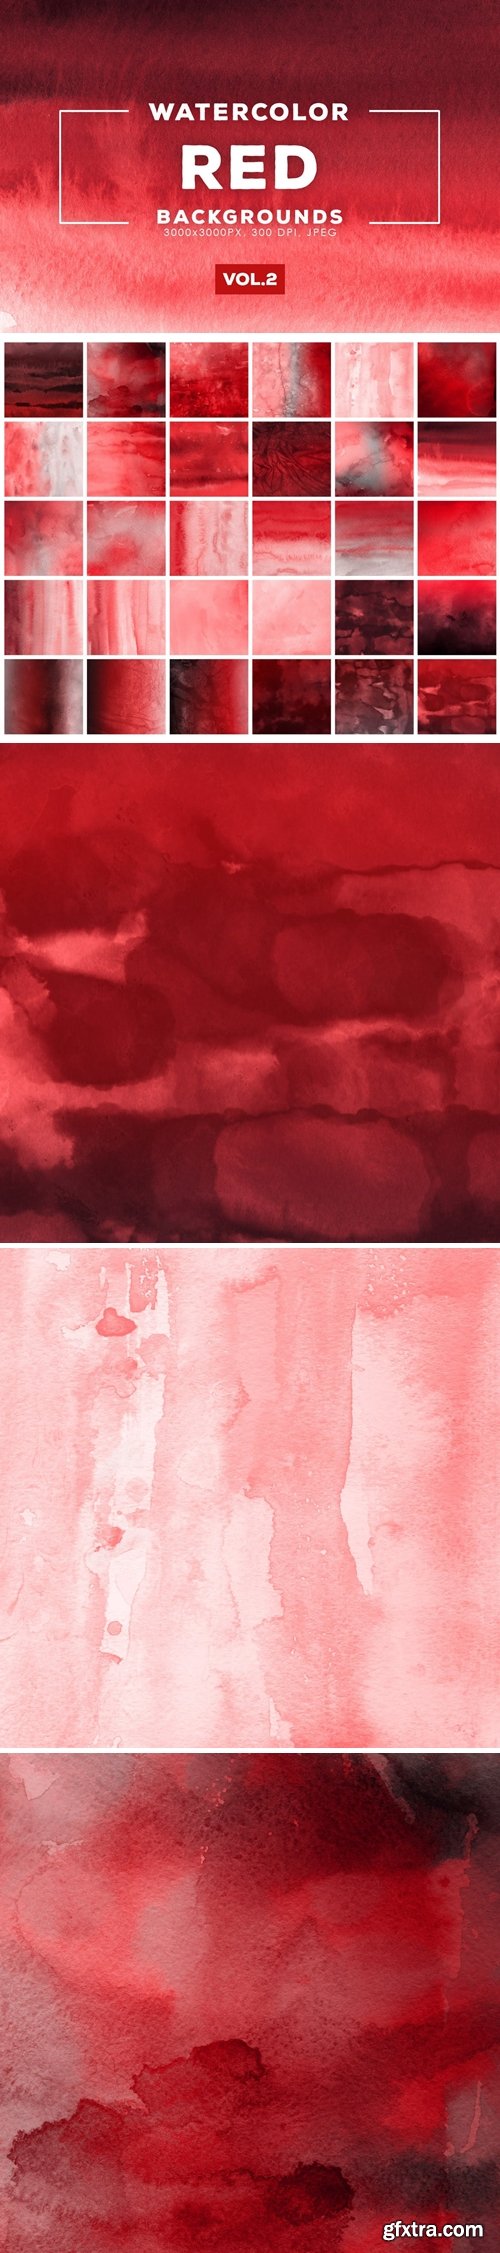 Watercolor Red Backgrounds Vol.2